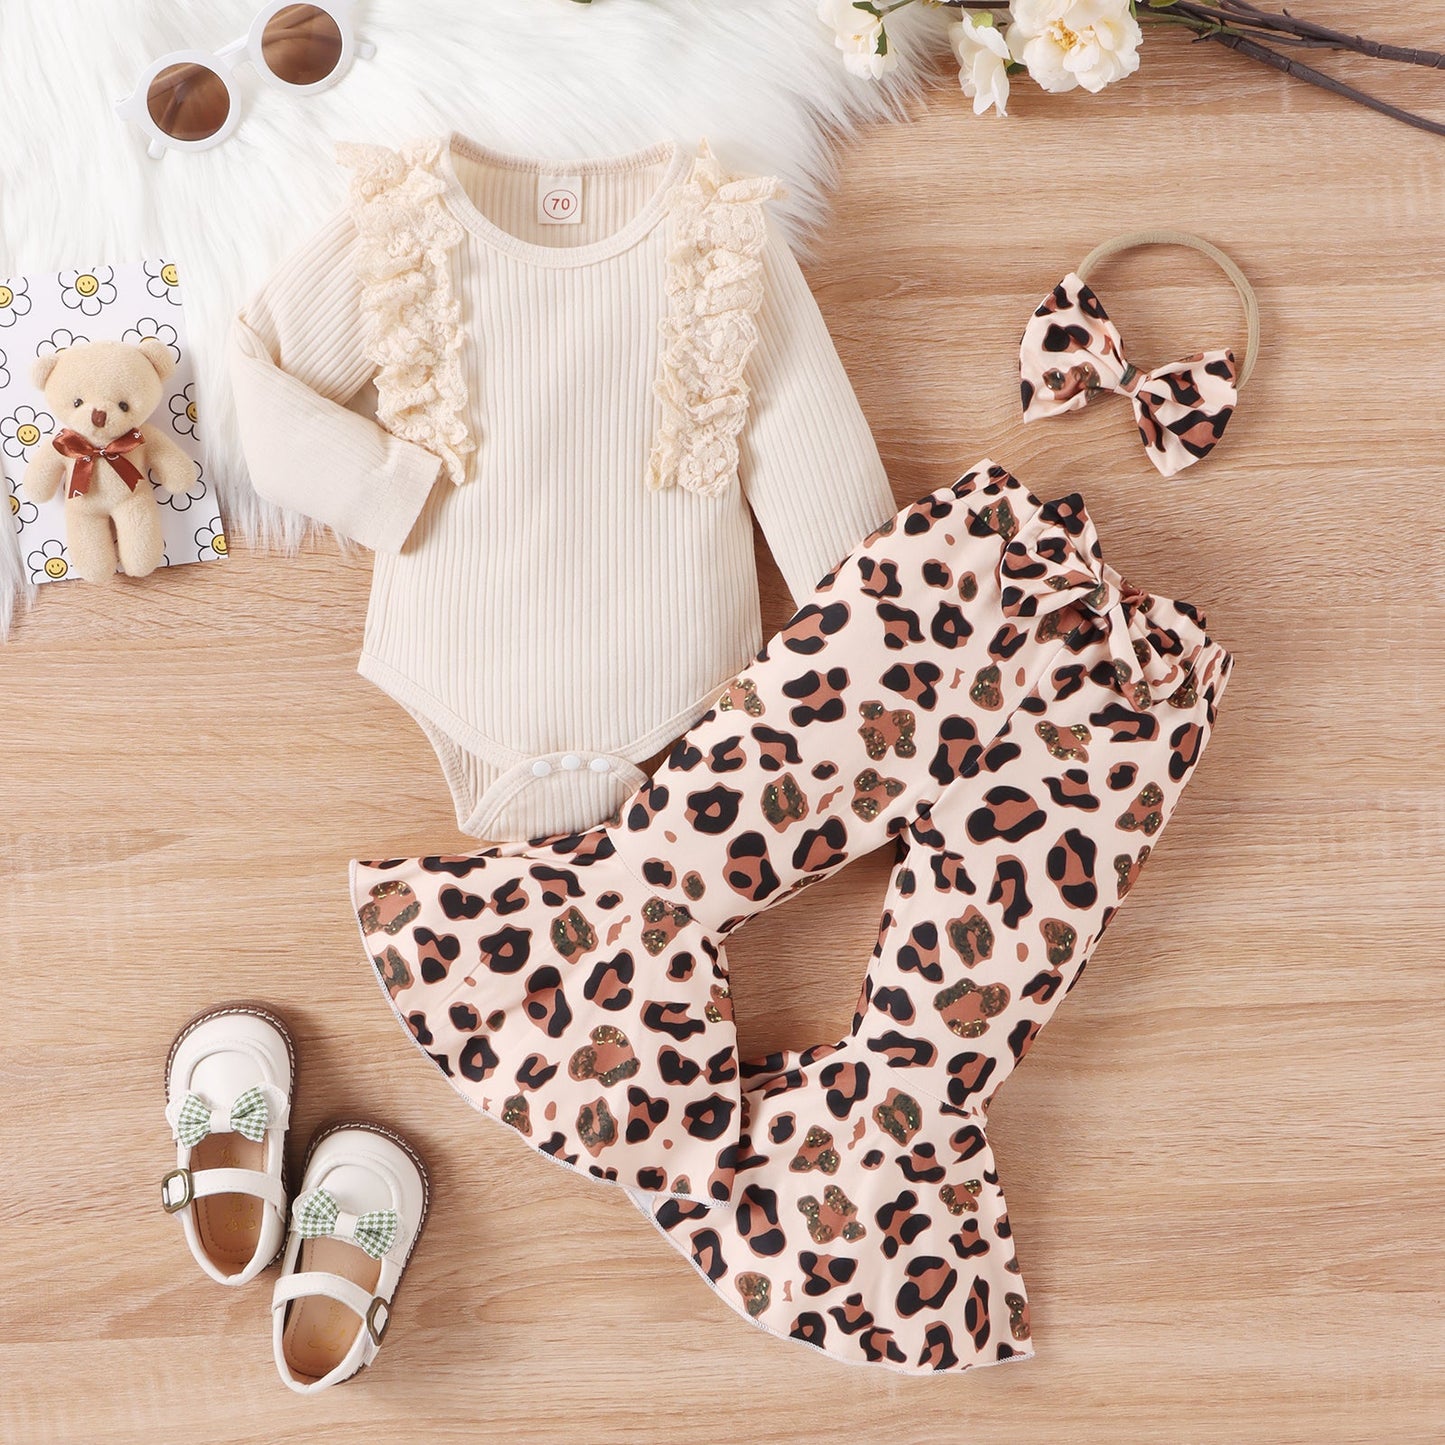 3-Piece Baby Sets